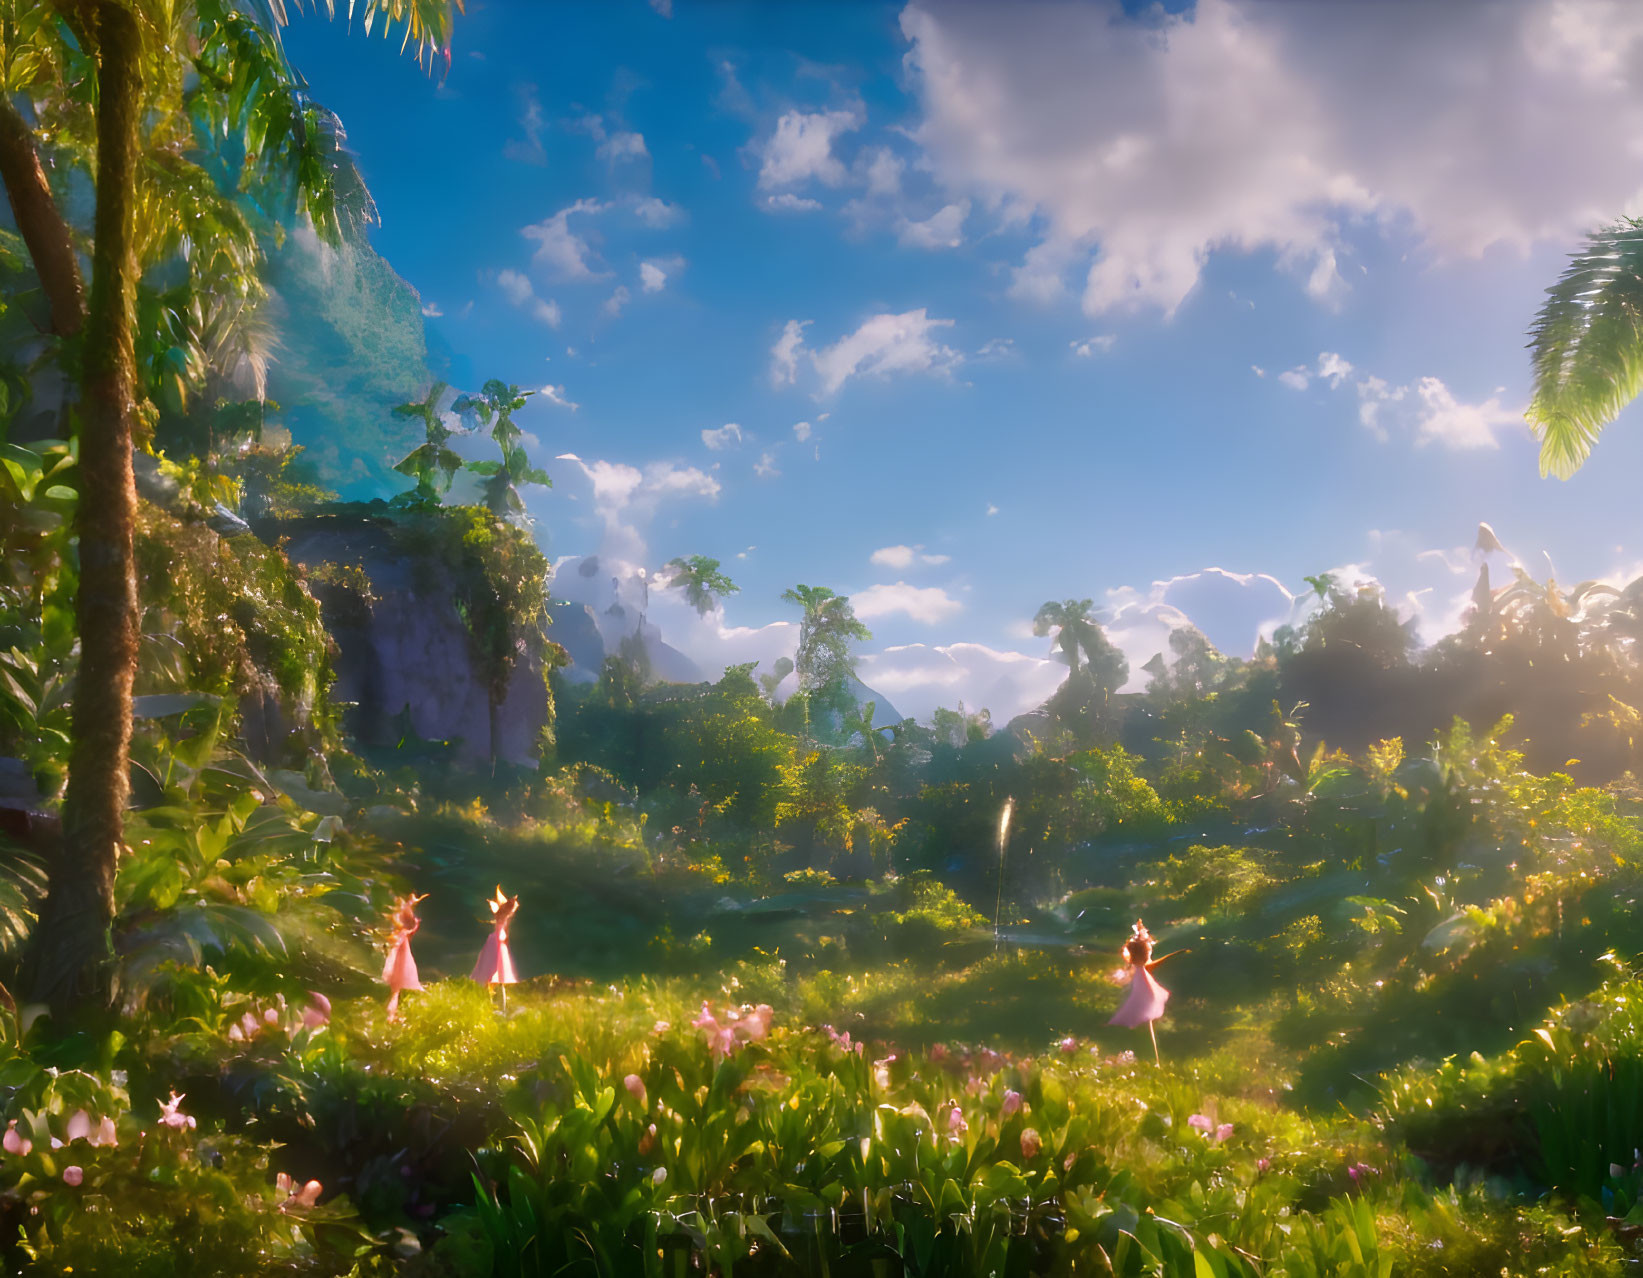 Enchanting forest sunrise with fairies, greenery, flowers, cliffs